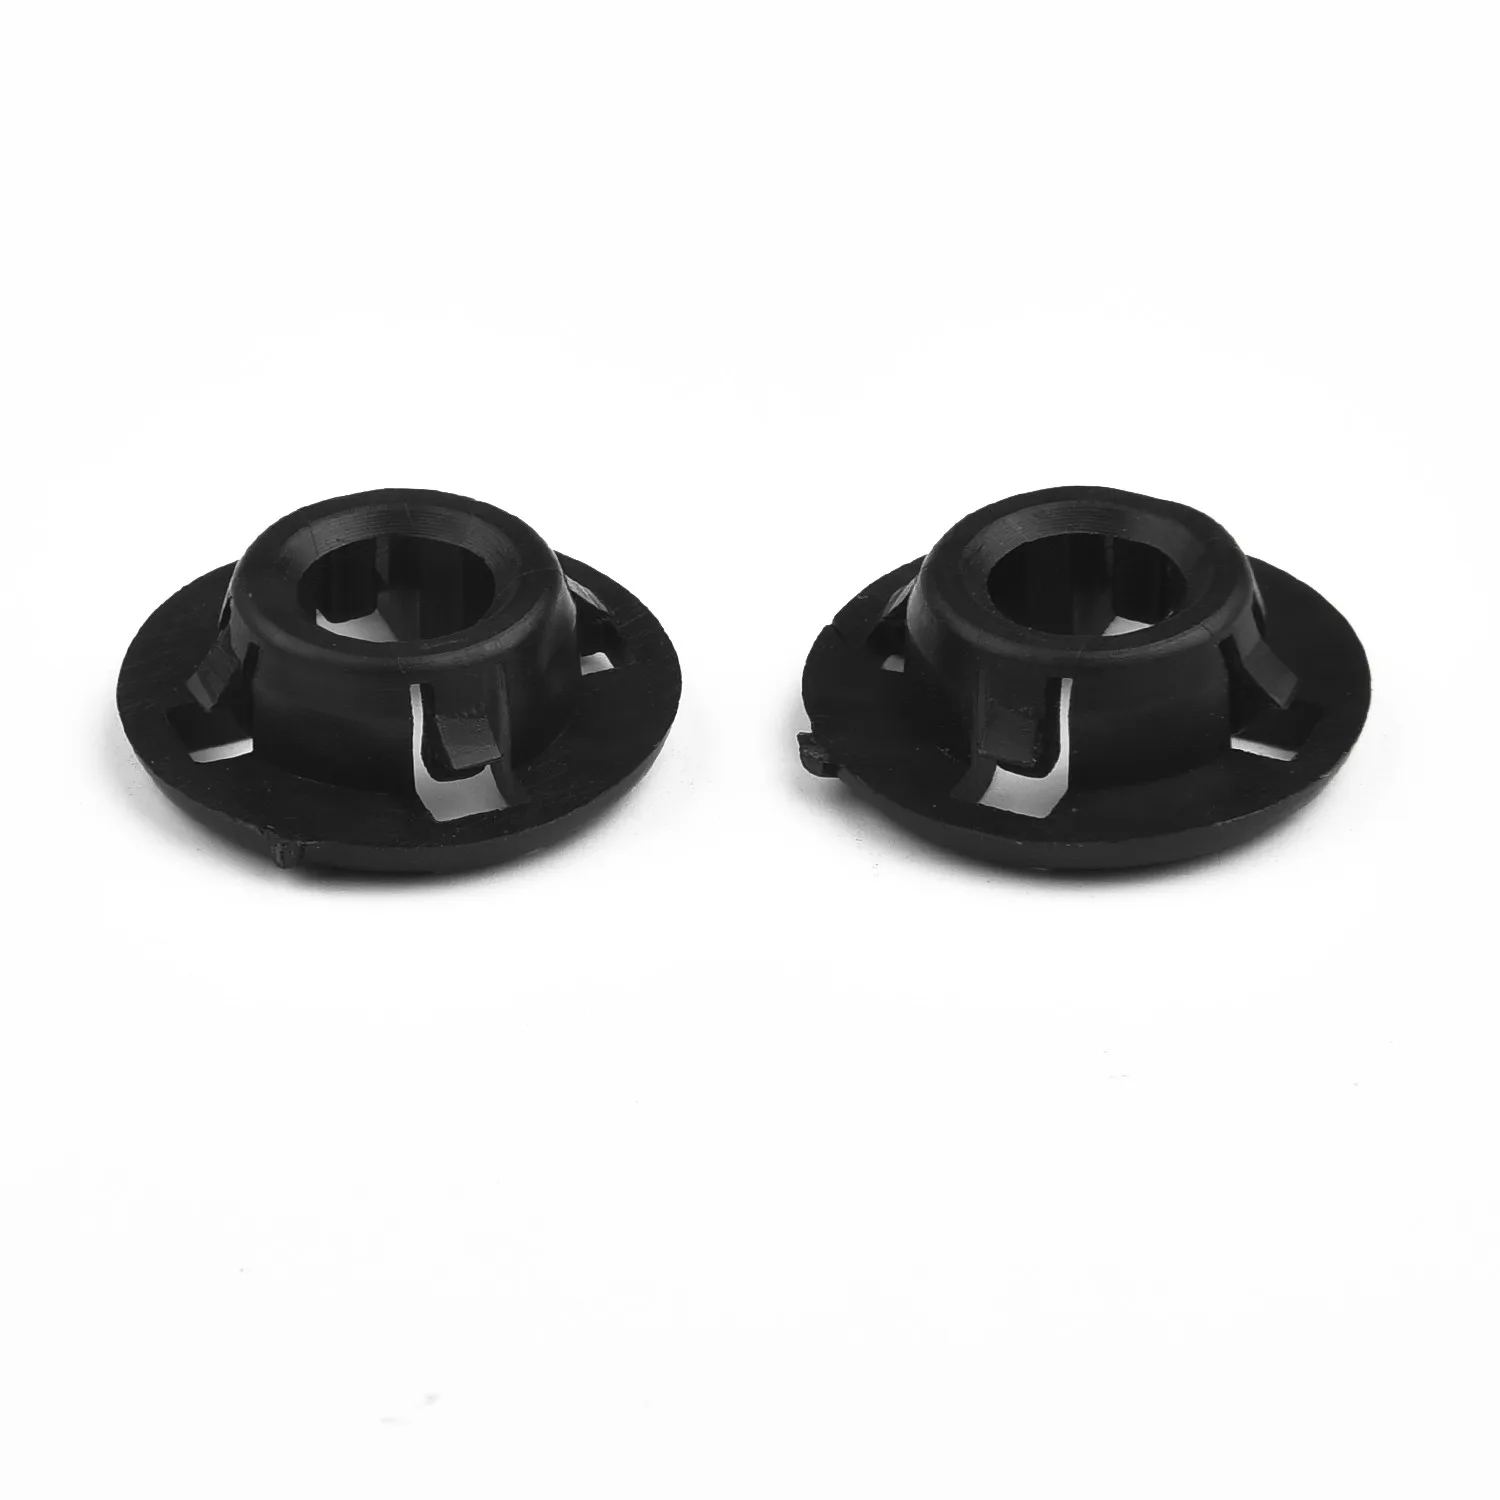 2pc Engine Hood Support Rod Bracket Clamp Ring Holder Clips Grommet For Toyota For Corolla For RAV4 For Scion XB Car Accessories